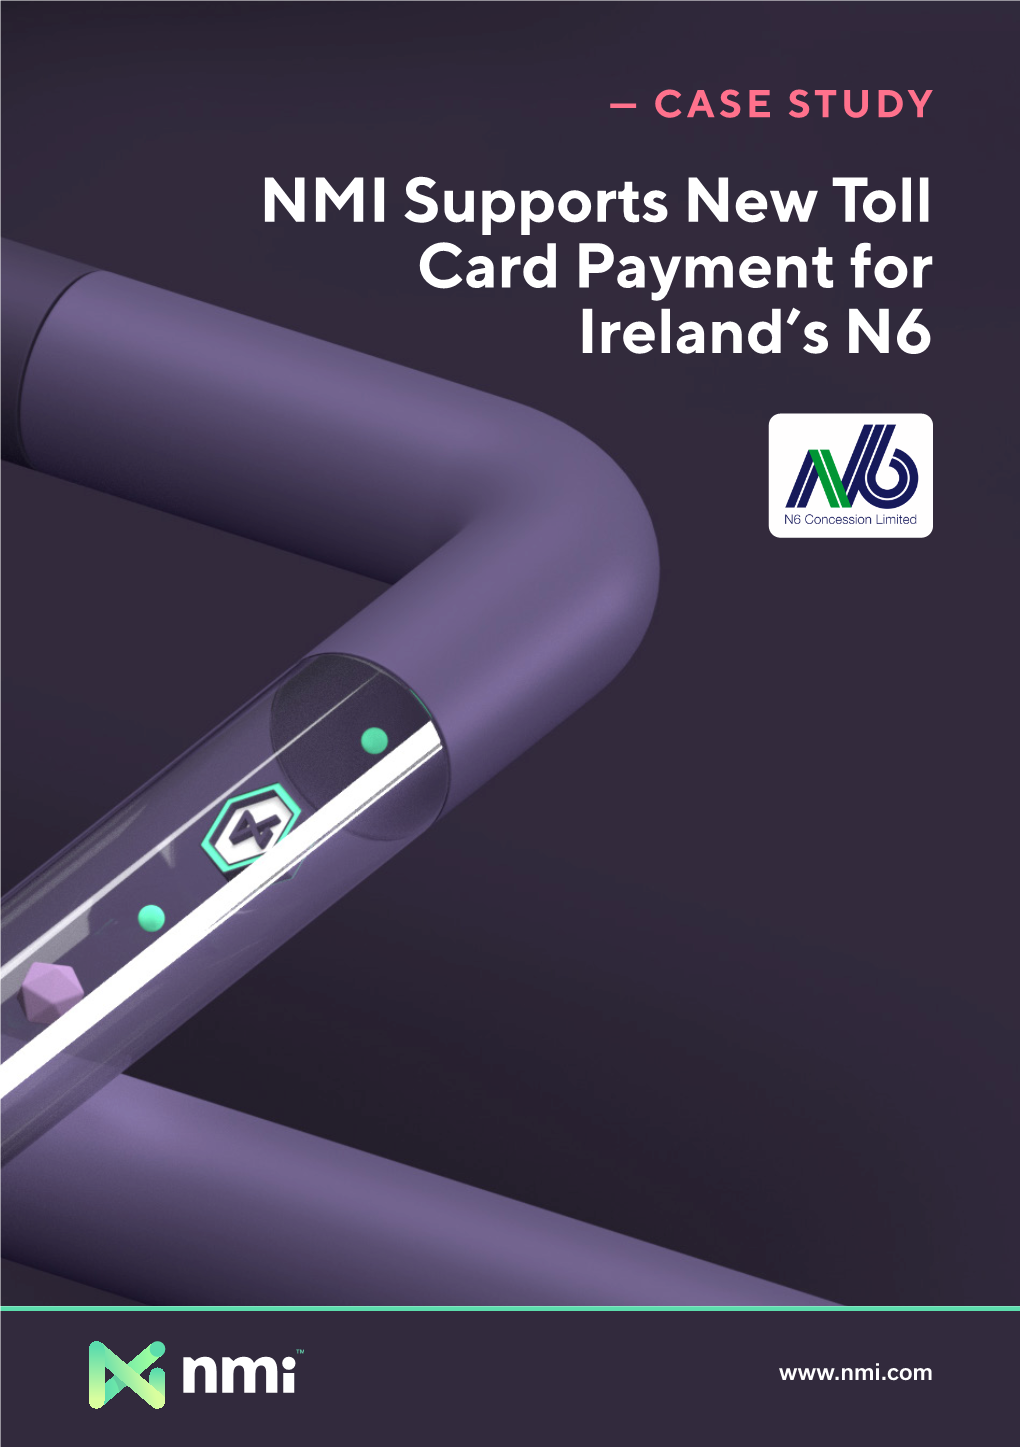 NMI Supports New Toll Card Payment for Ireland's N6